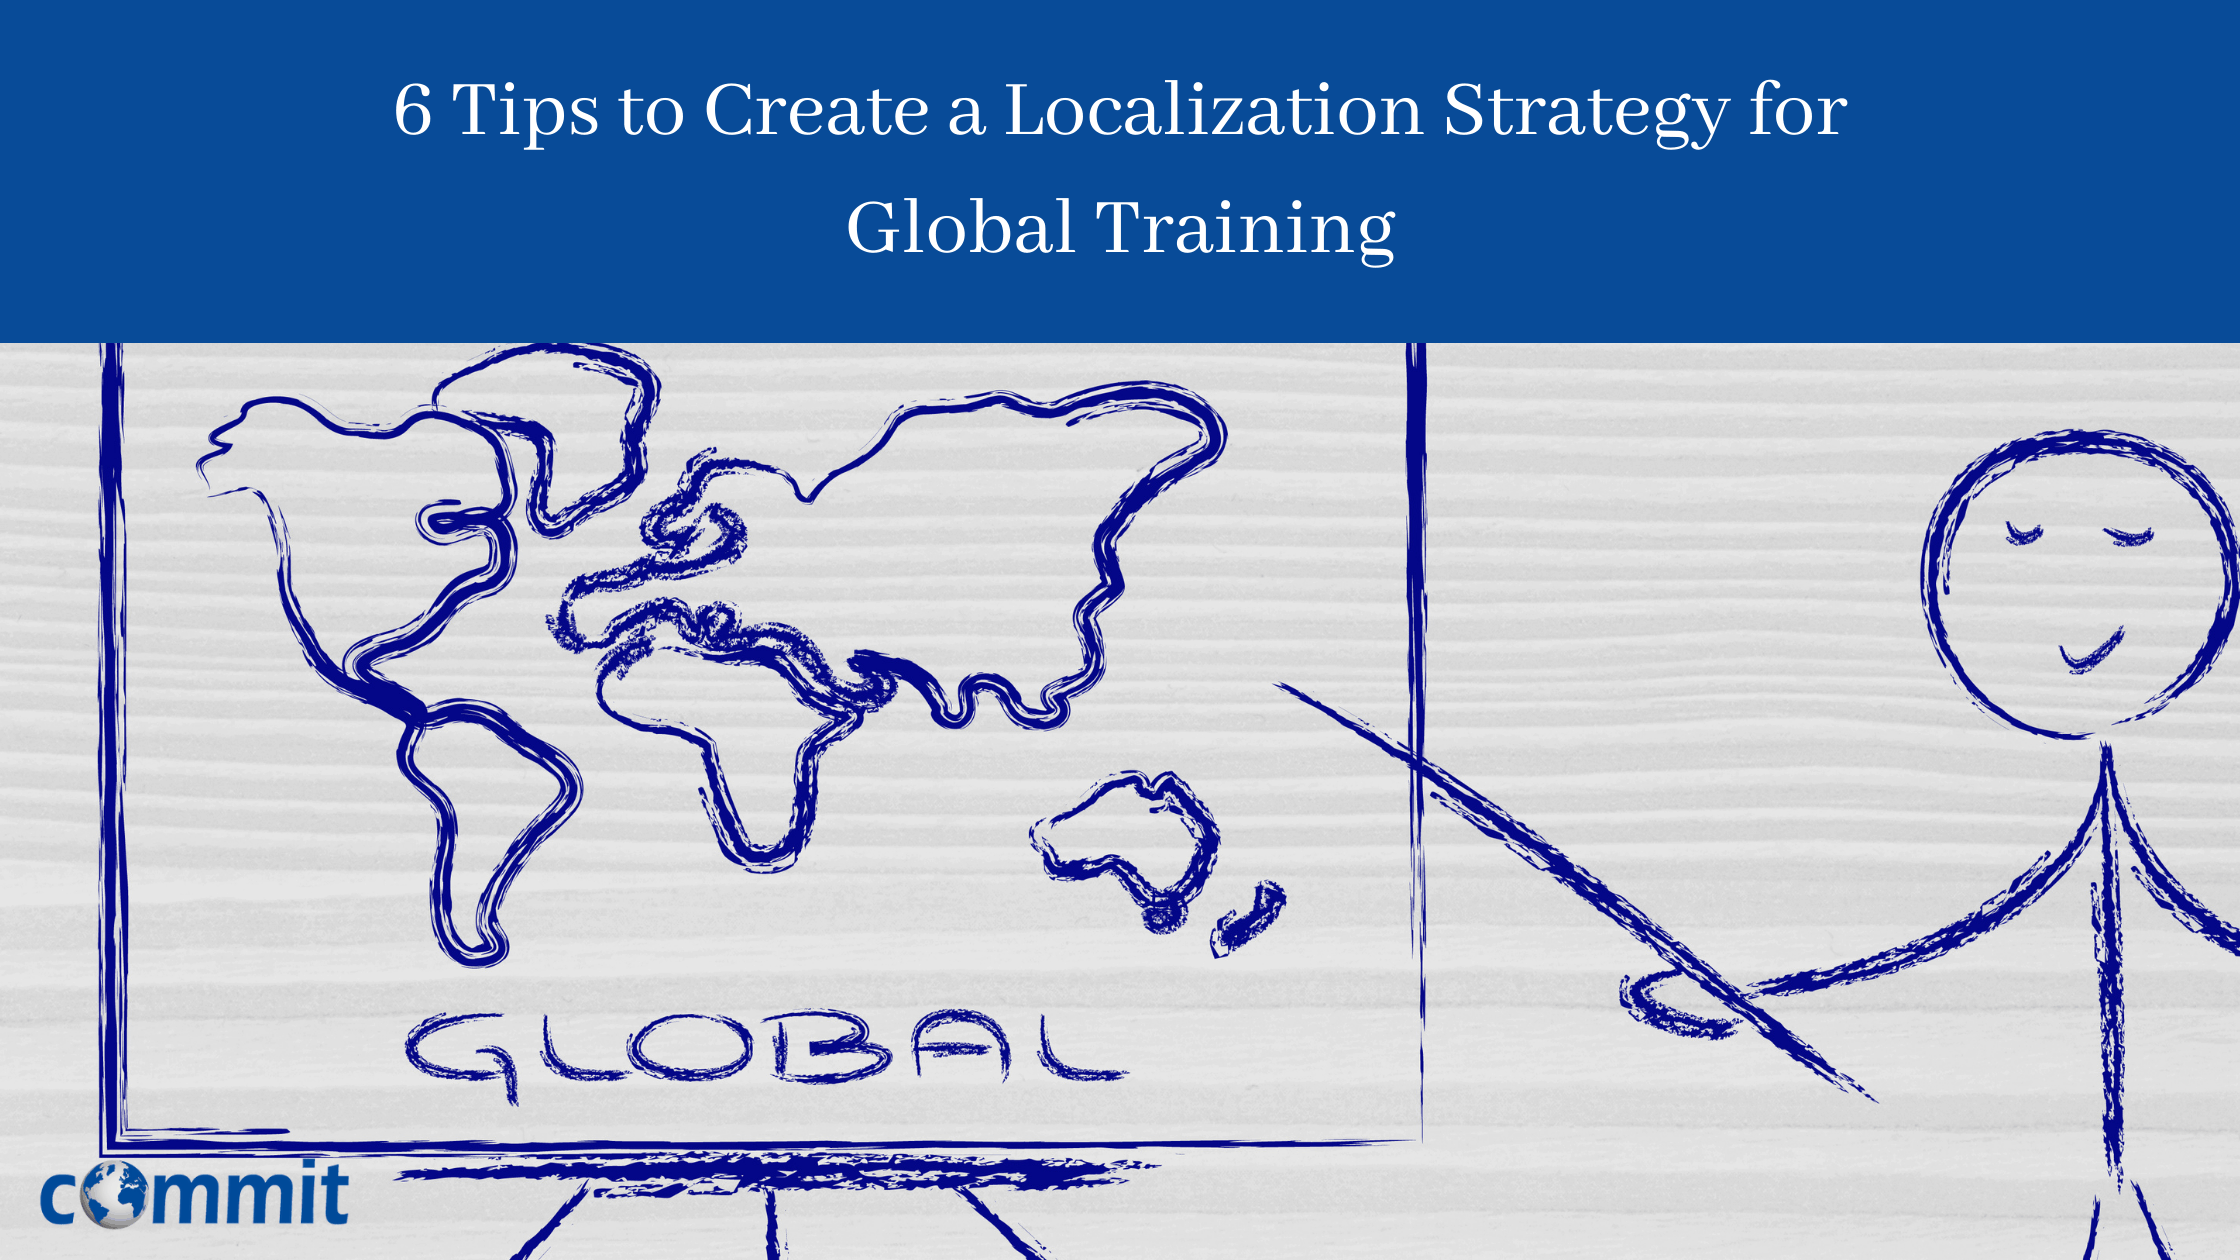 6 Tips to Create a Localization Strategy for Global Training